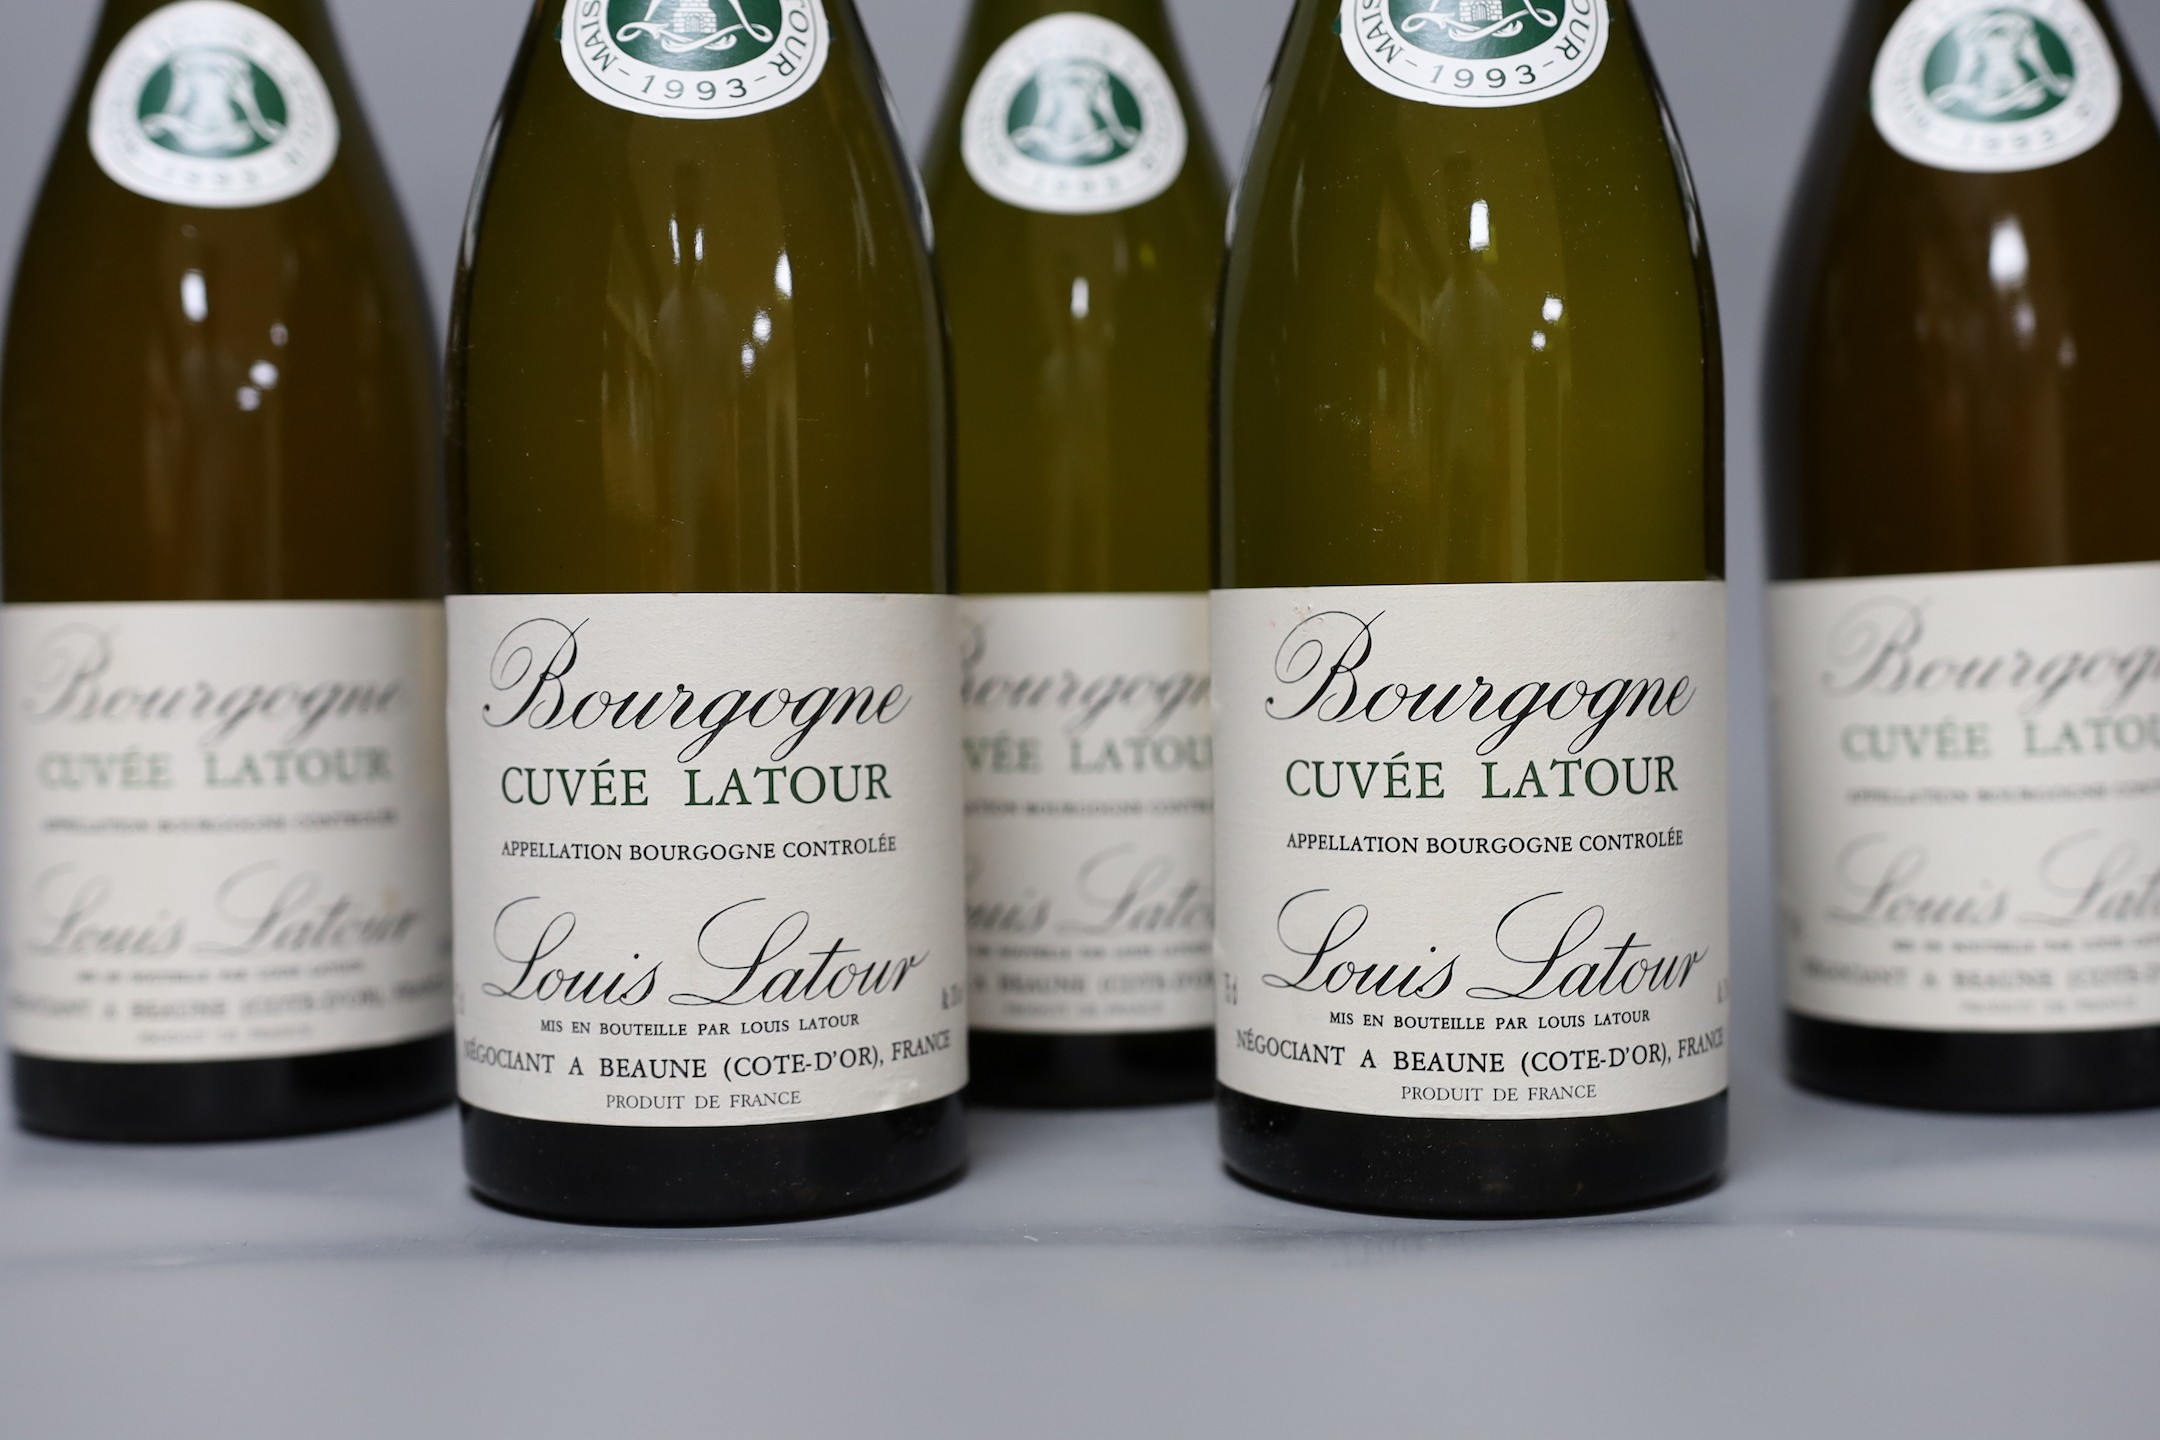 Five bottles of 1993 Bourgogne Blanc Cuvee Latour, together with a bottle of 1993 Givry (6)